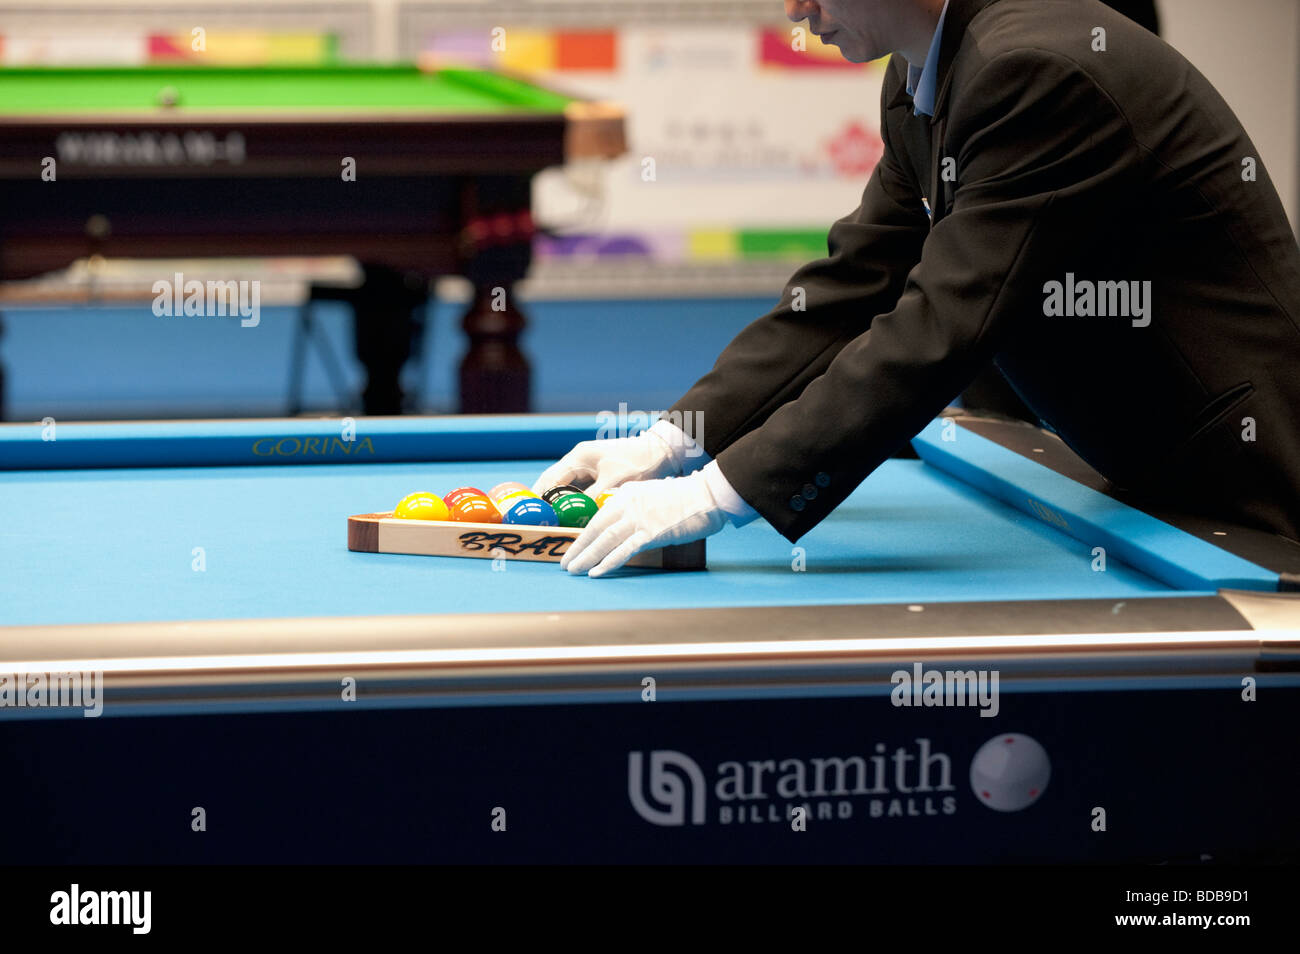 Man Racking the balls in Billiards 9 Ball competition, World Games, Kaohsiung, Taiwan, July 23, 2009 Stock Photo